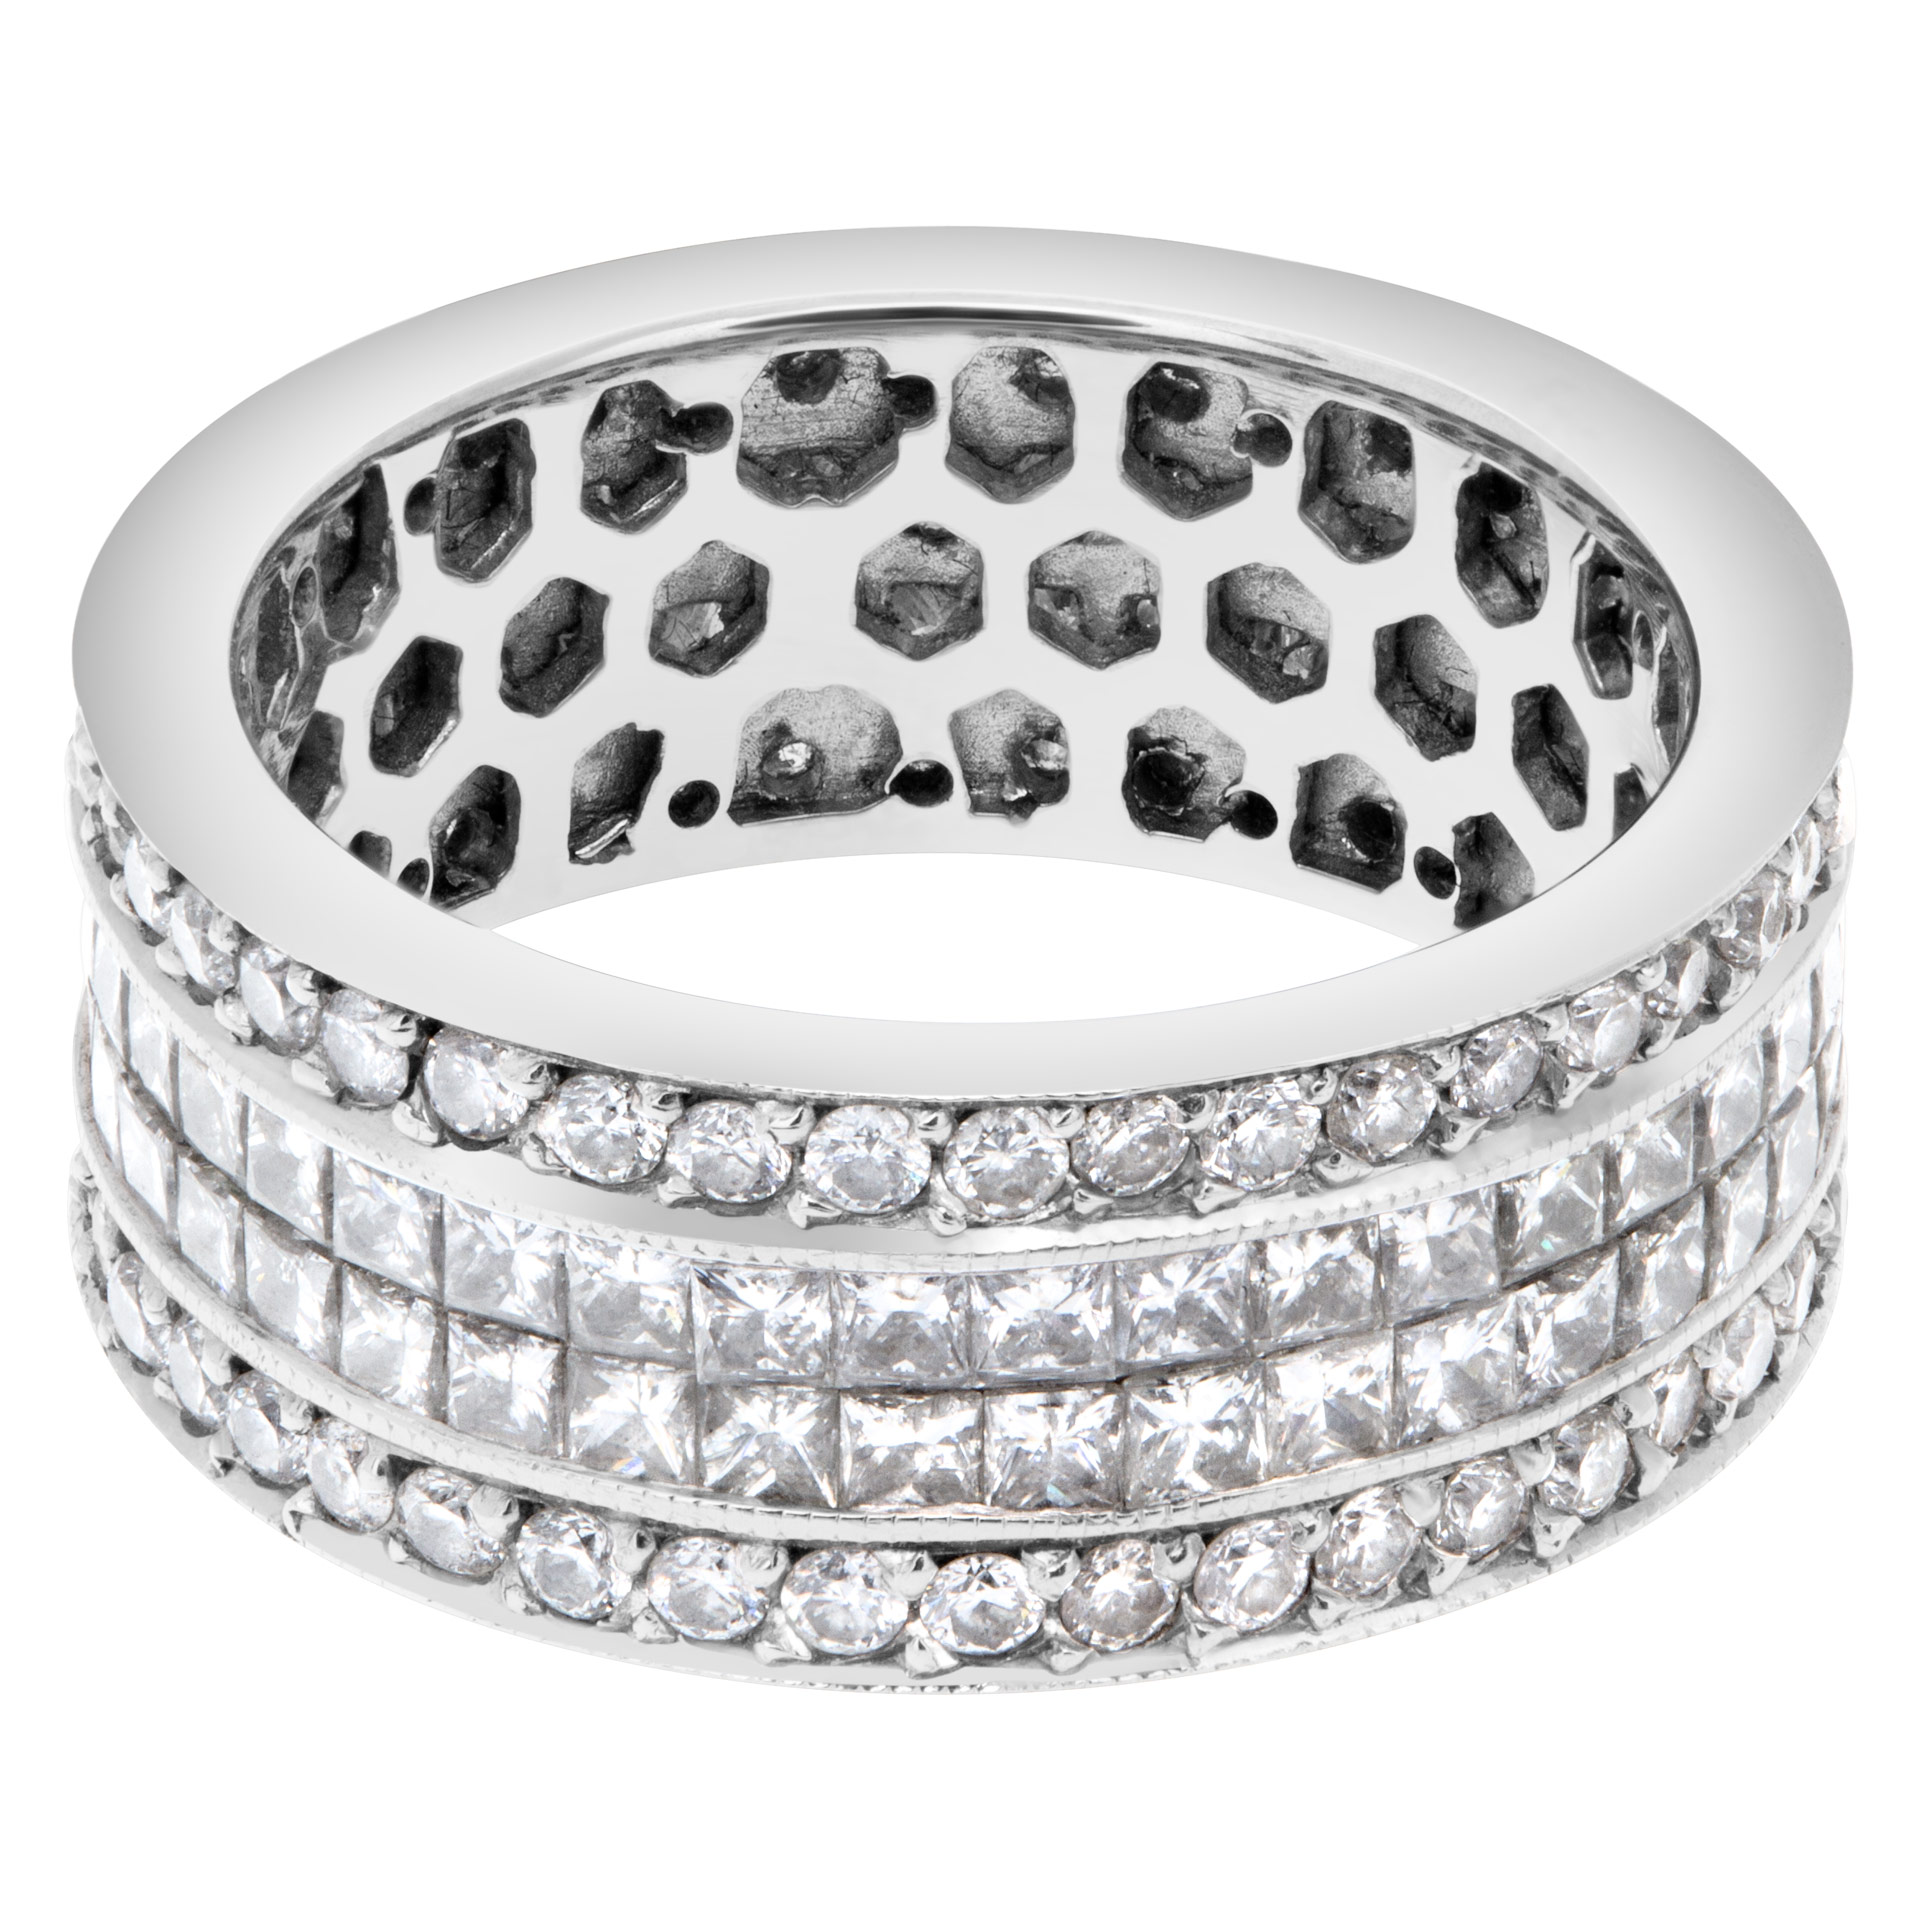 Large diamond eternity band in 14k with over 5 carats in diamonds